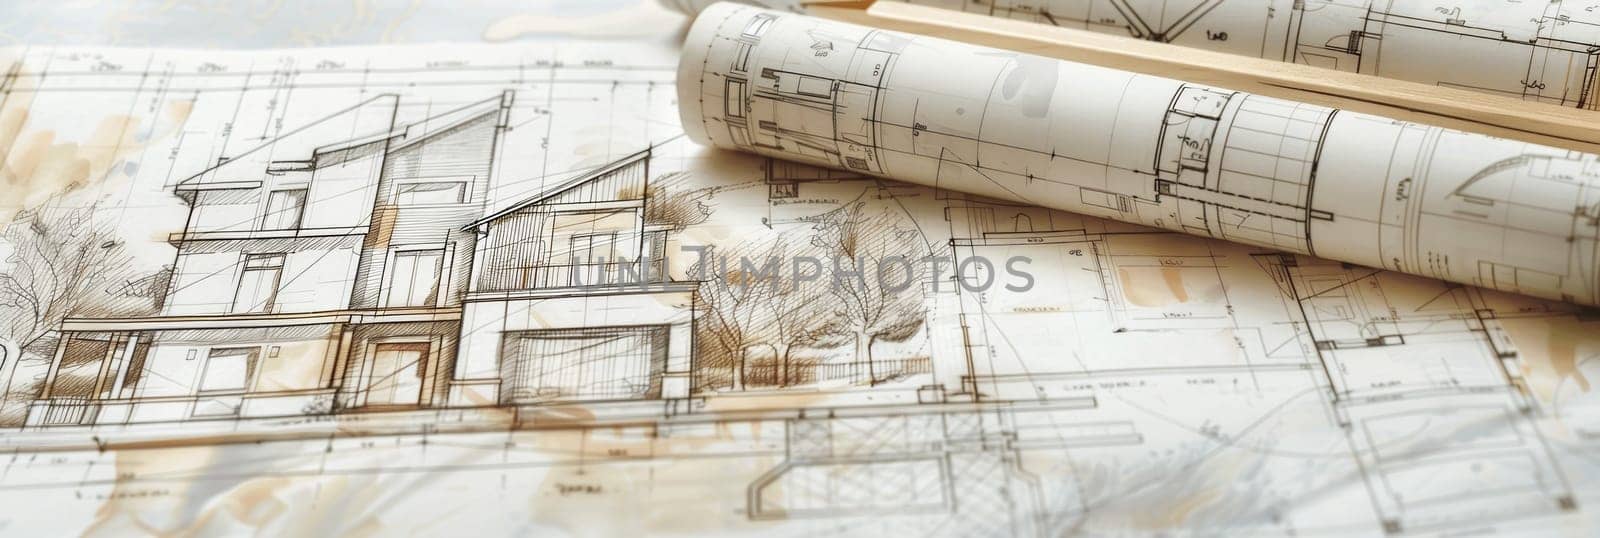 A detailed pencil drawing of a cozy home on a sheet of paper. The house features classic architectural elements and intricate design.